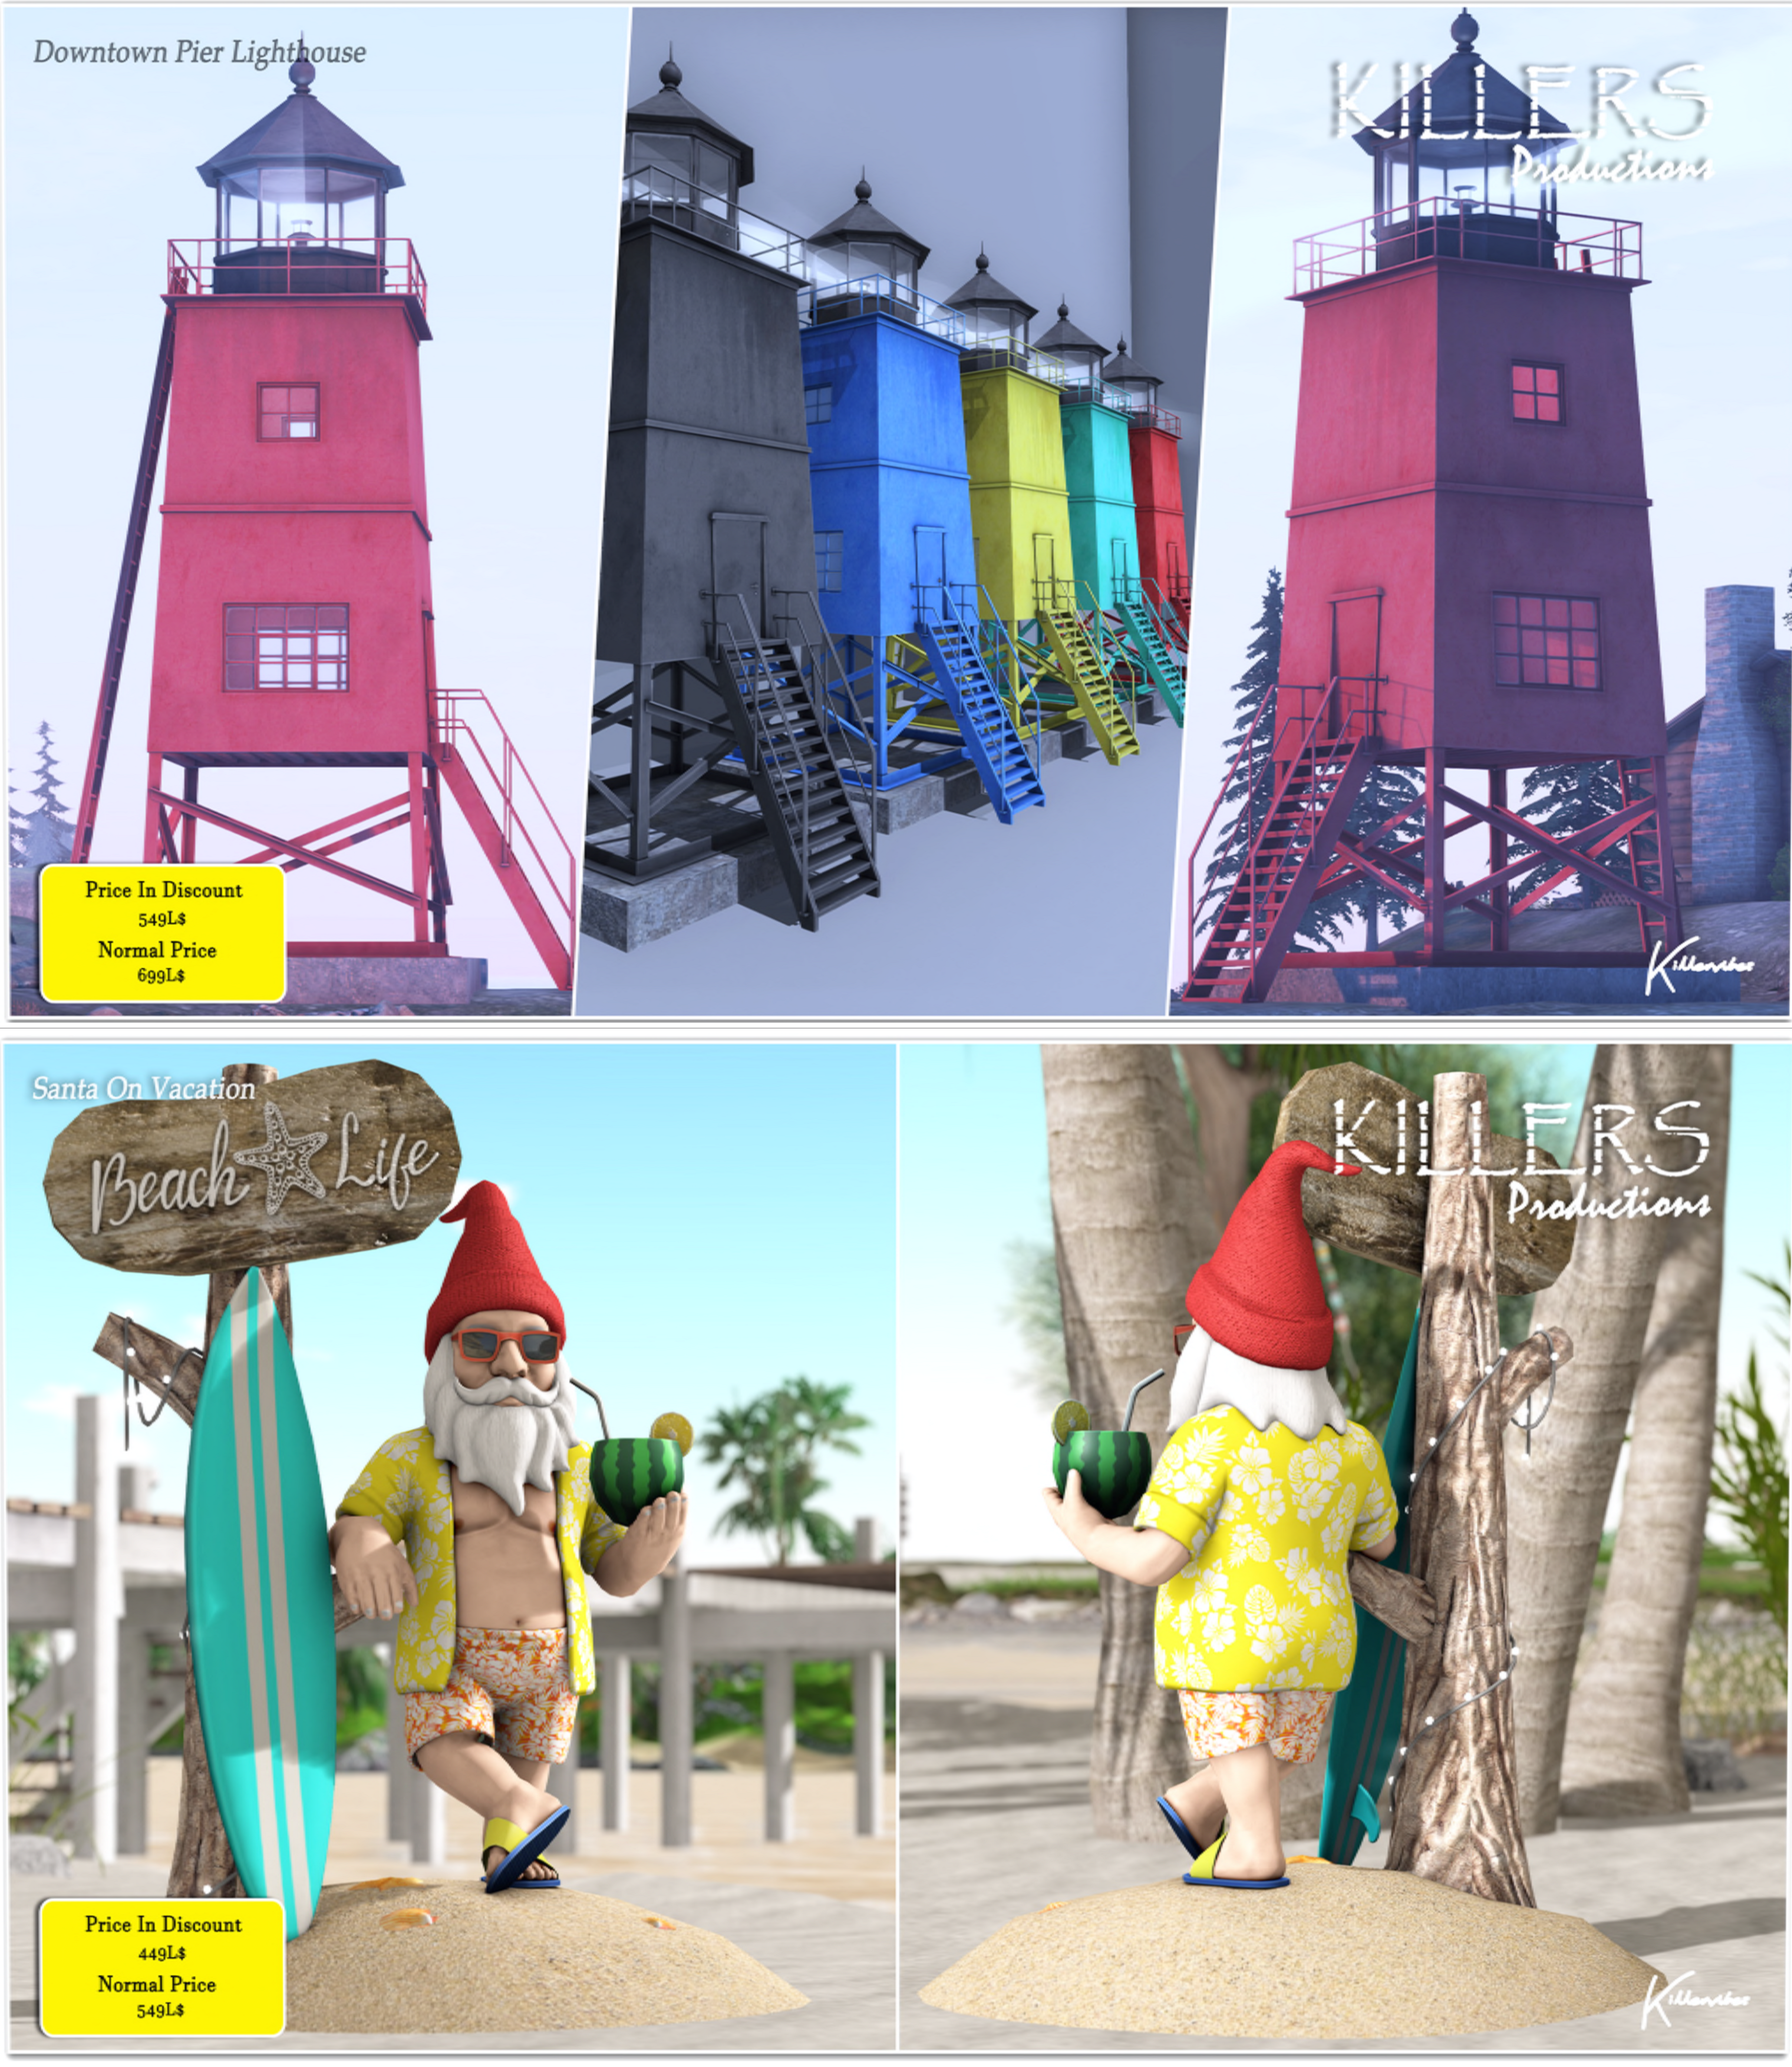 Killers Productions – Downtown Pier Lighthouse & Santa On Vacation